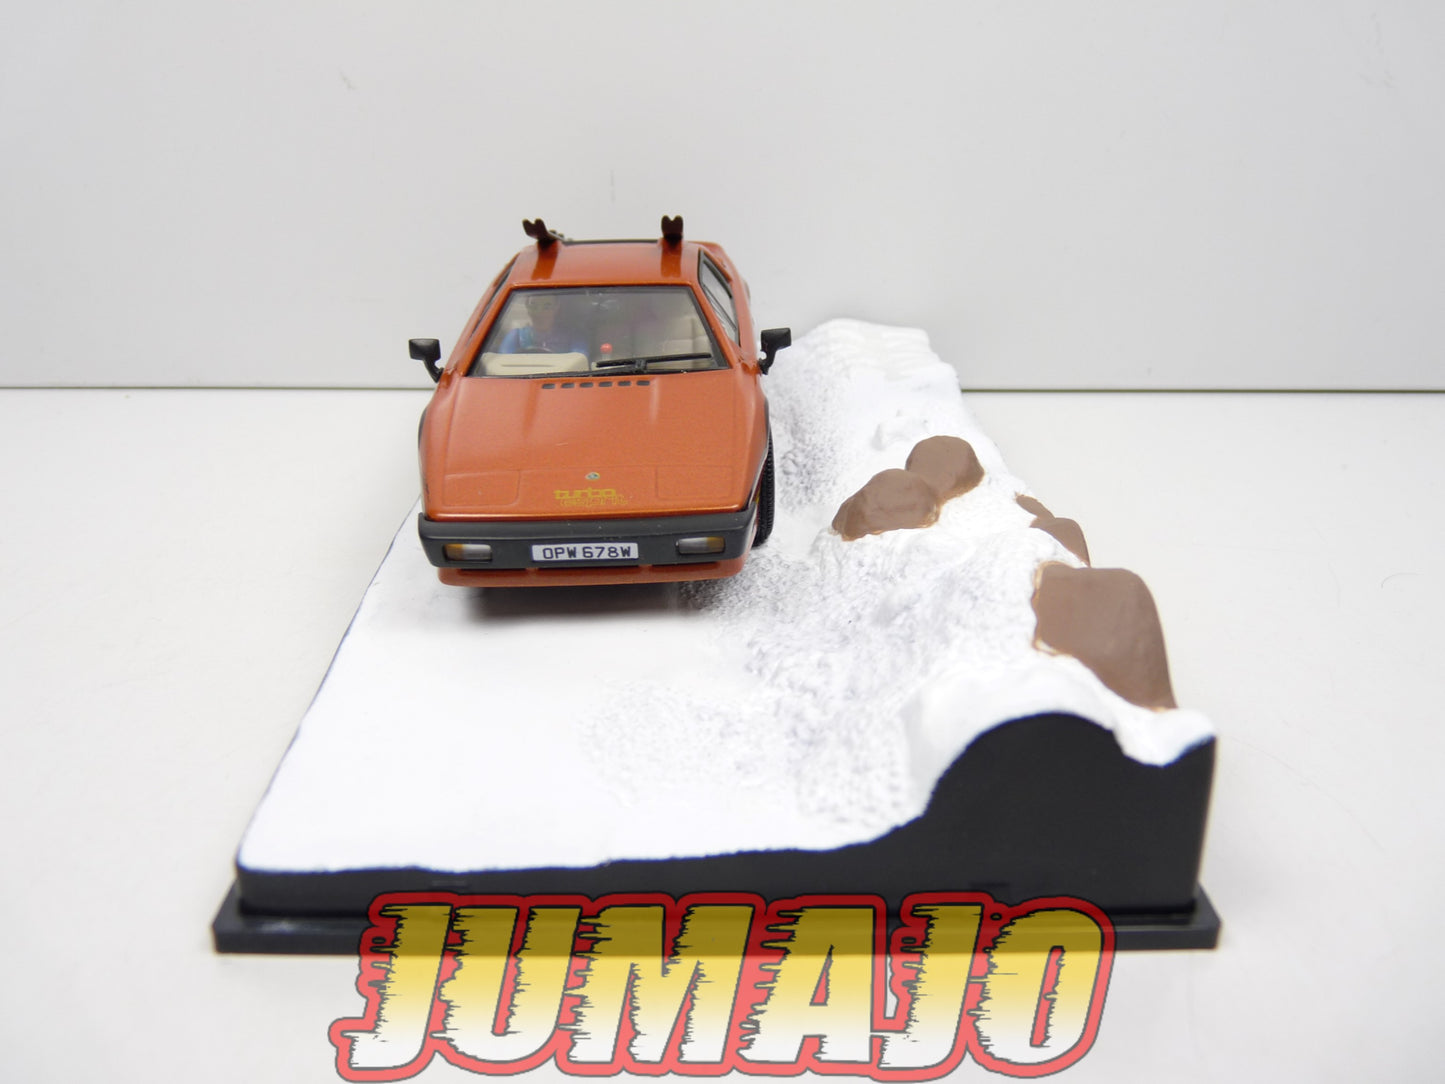 JB9 voiture 1/43 IXO 007 JAMES BOND Lotus Esprit Turbo for your eyes only